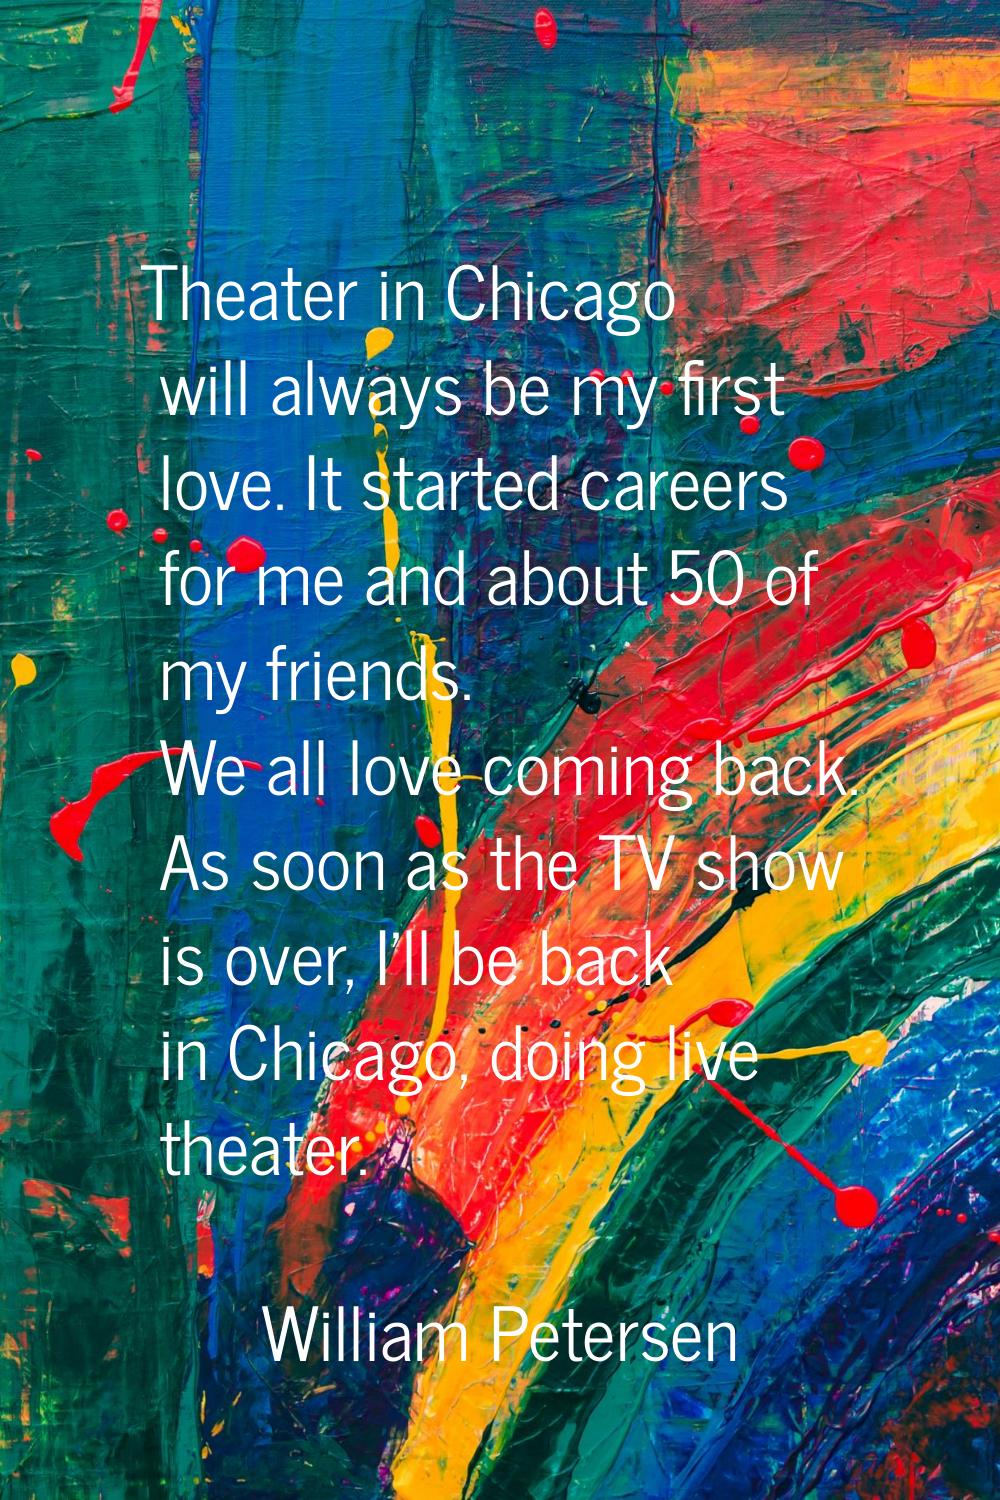 Theater in Chicago will always be my first love. It started careers for me and about 50 of my frien